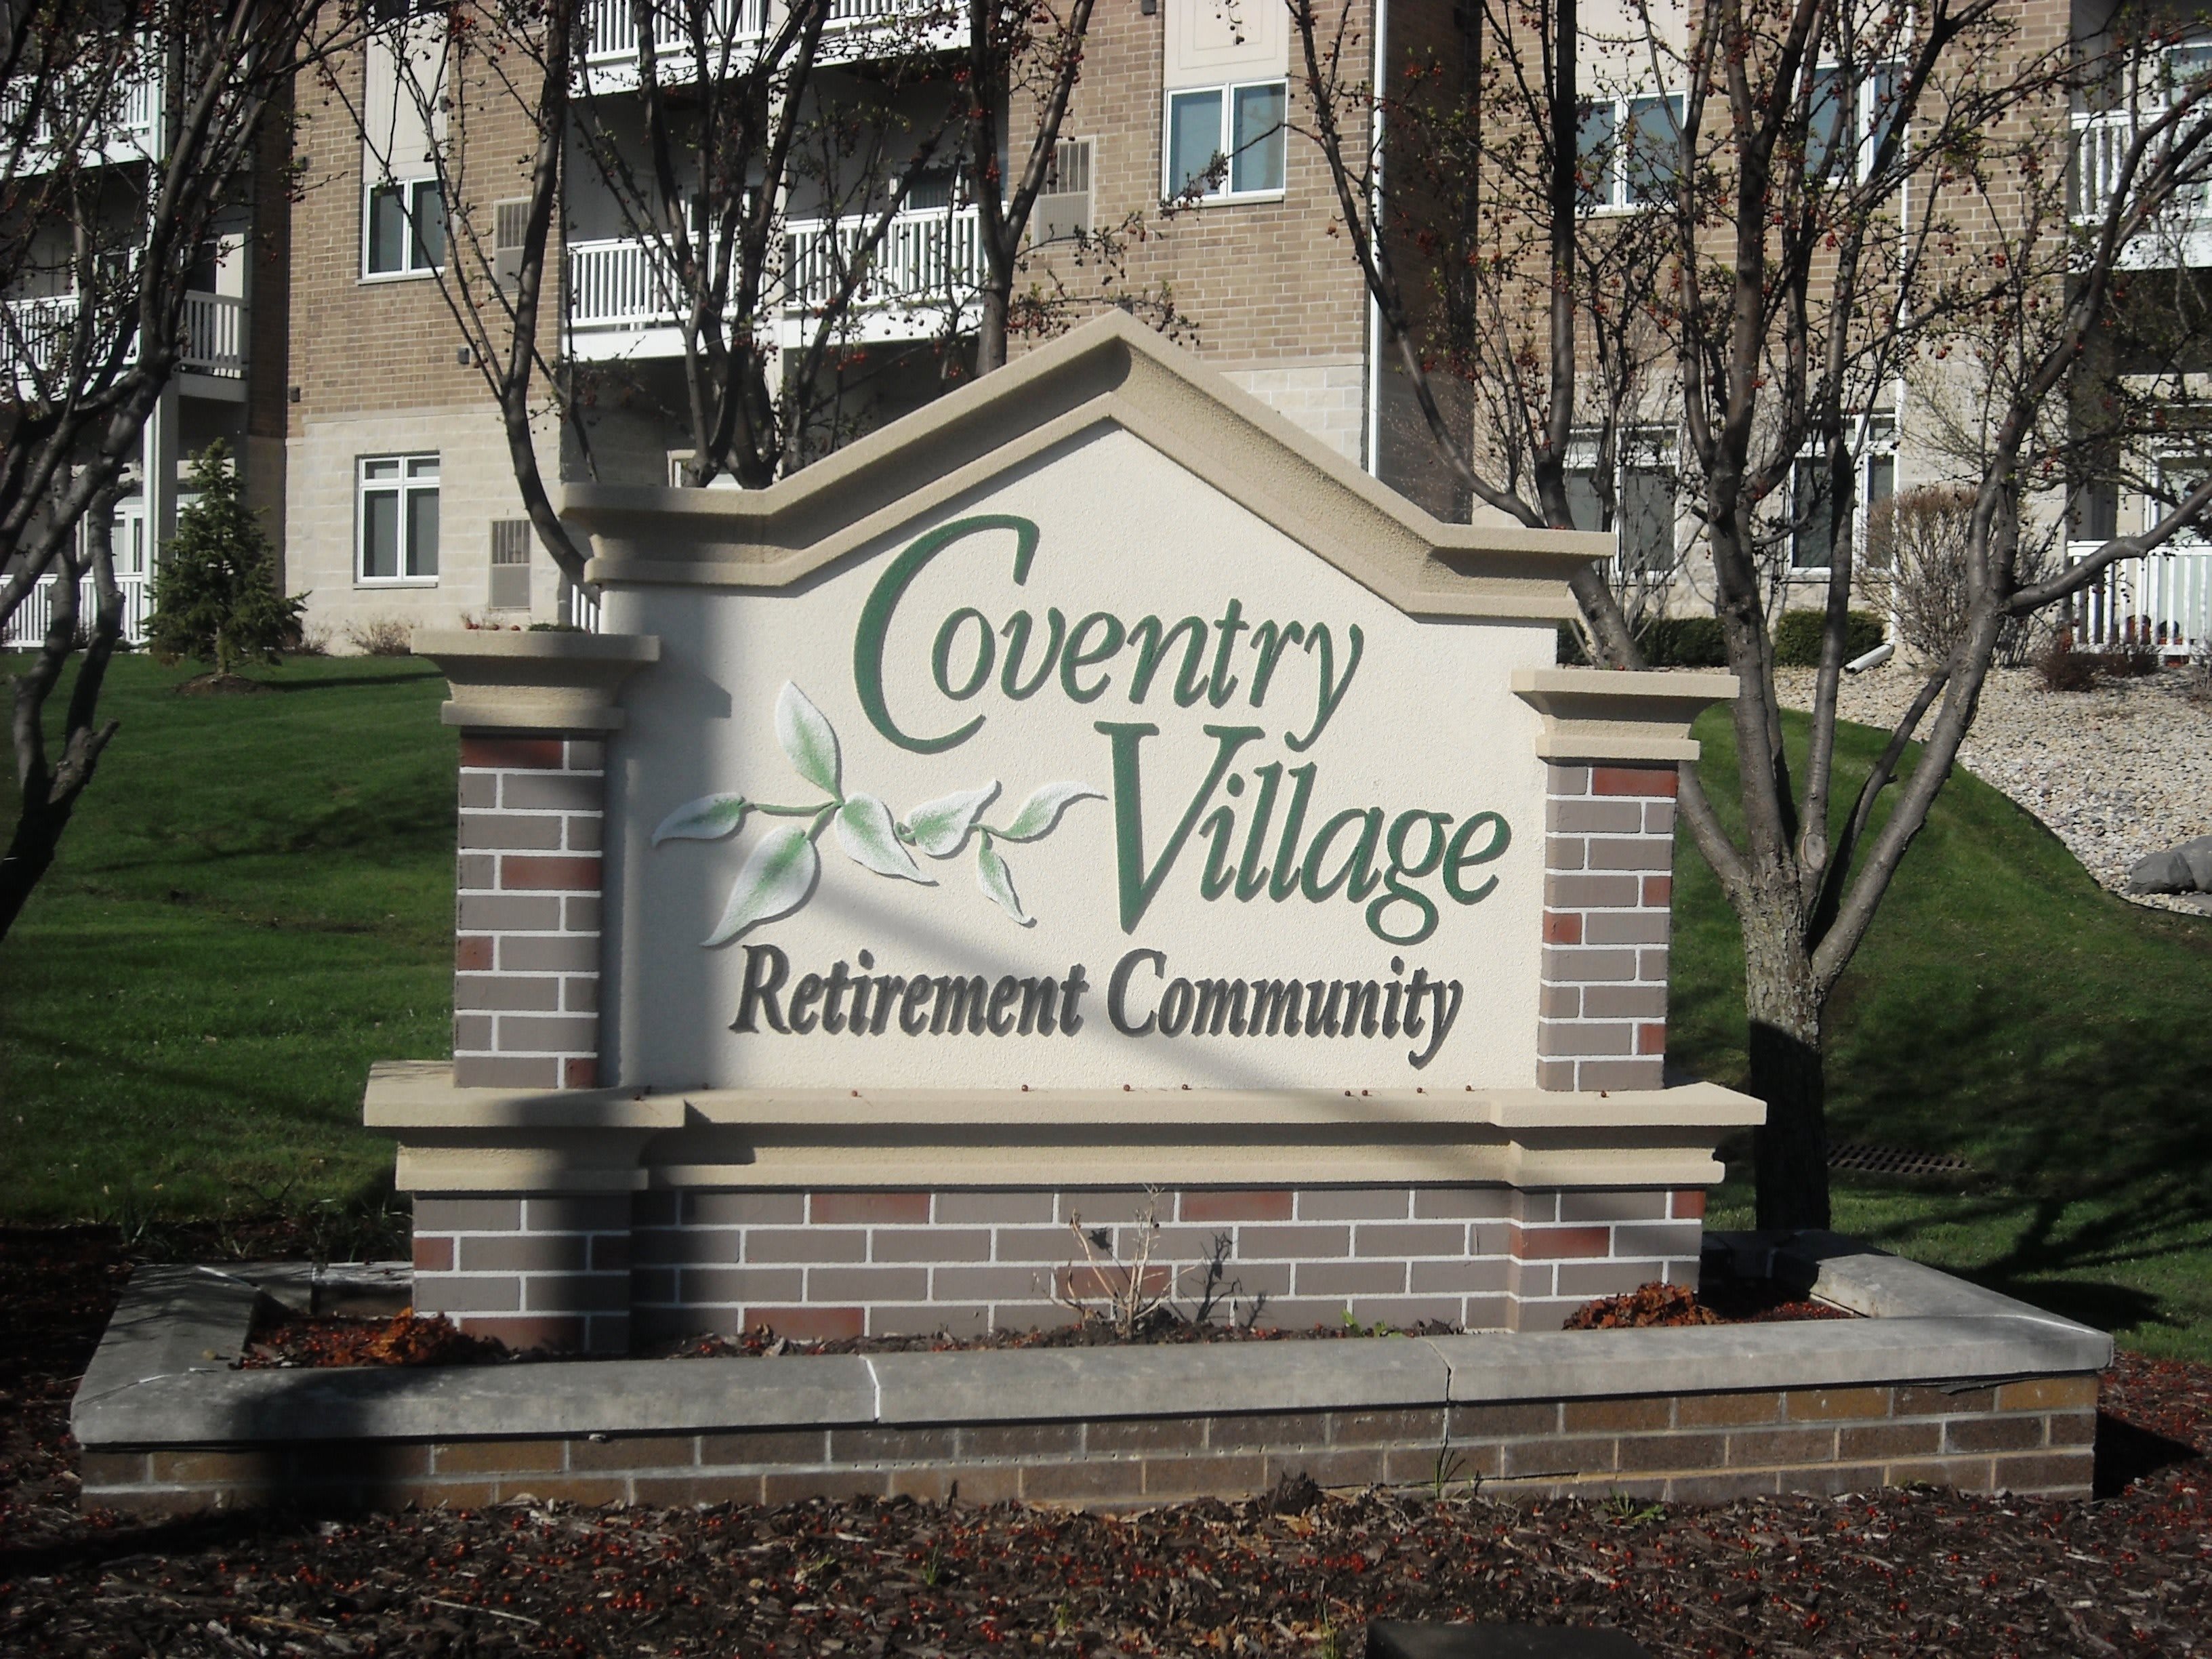 Coventry Village community exterior